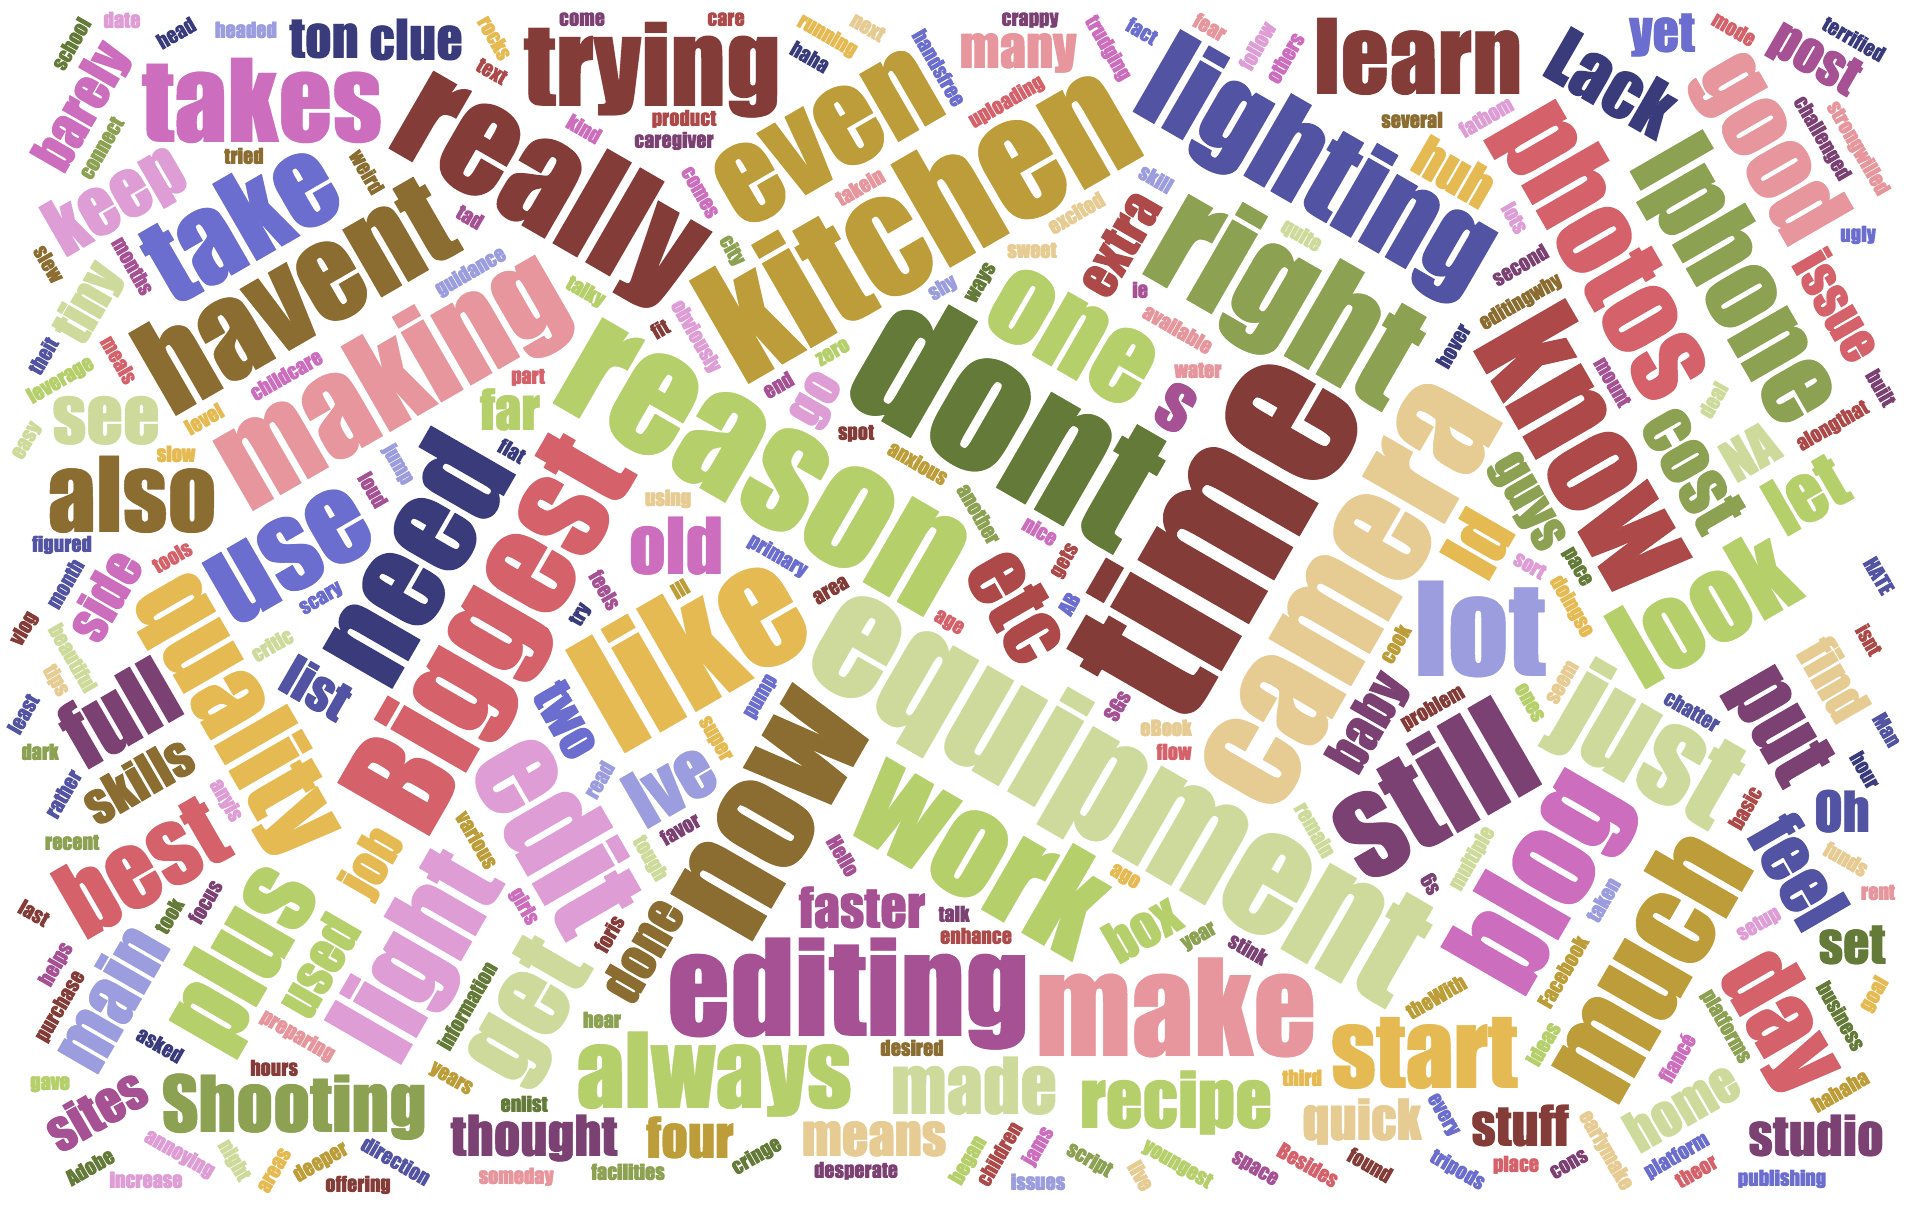 My Struggle with Video Word Cloud.